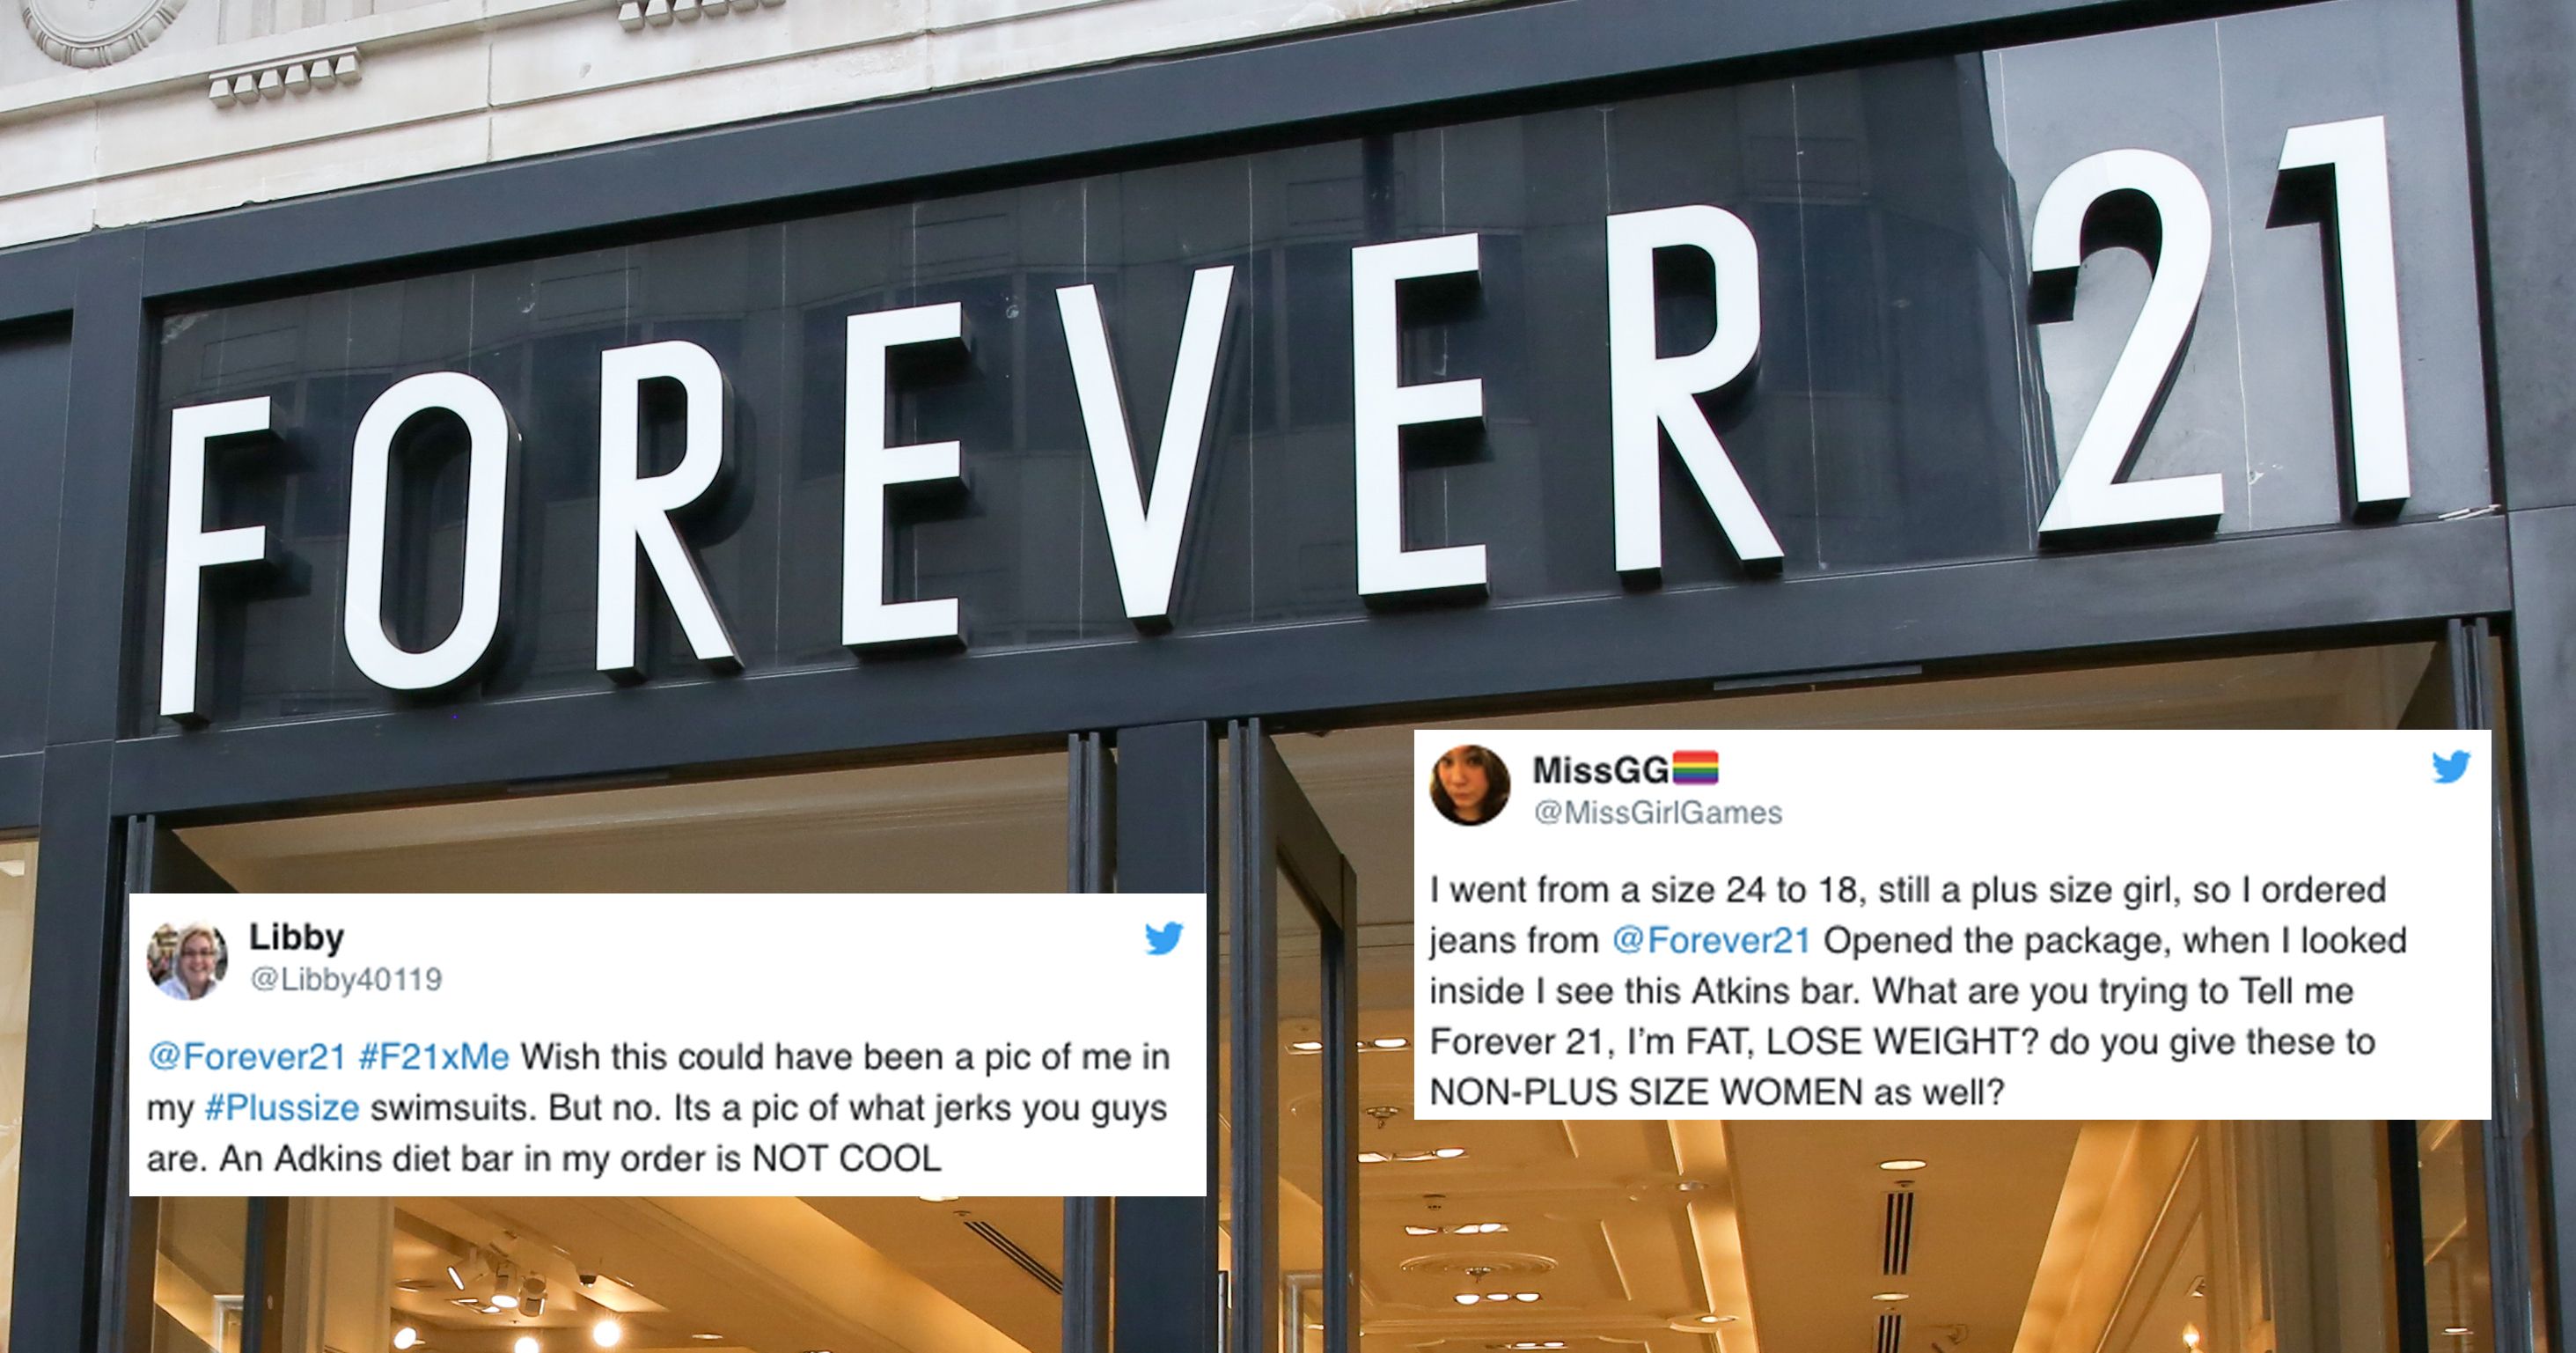 Forever 21 apologizes for sending Atkins bars with online orders